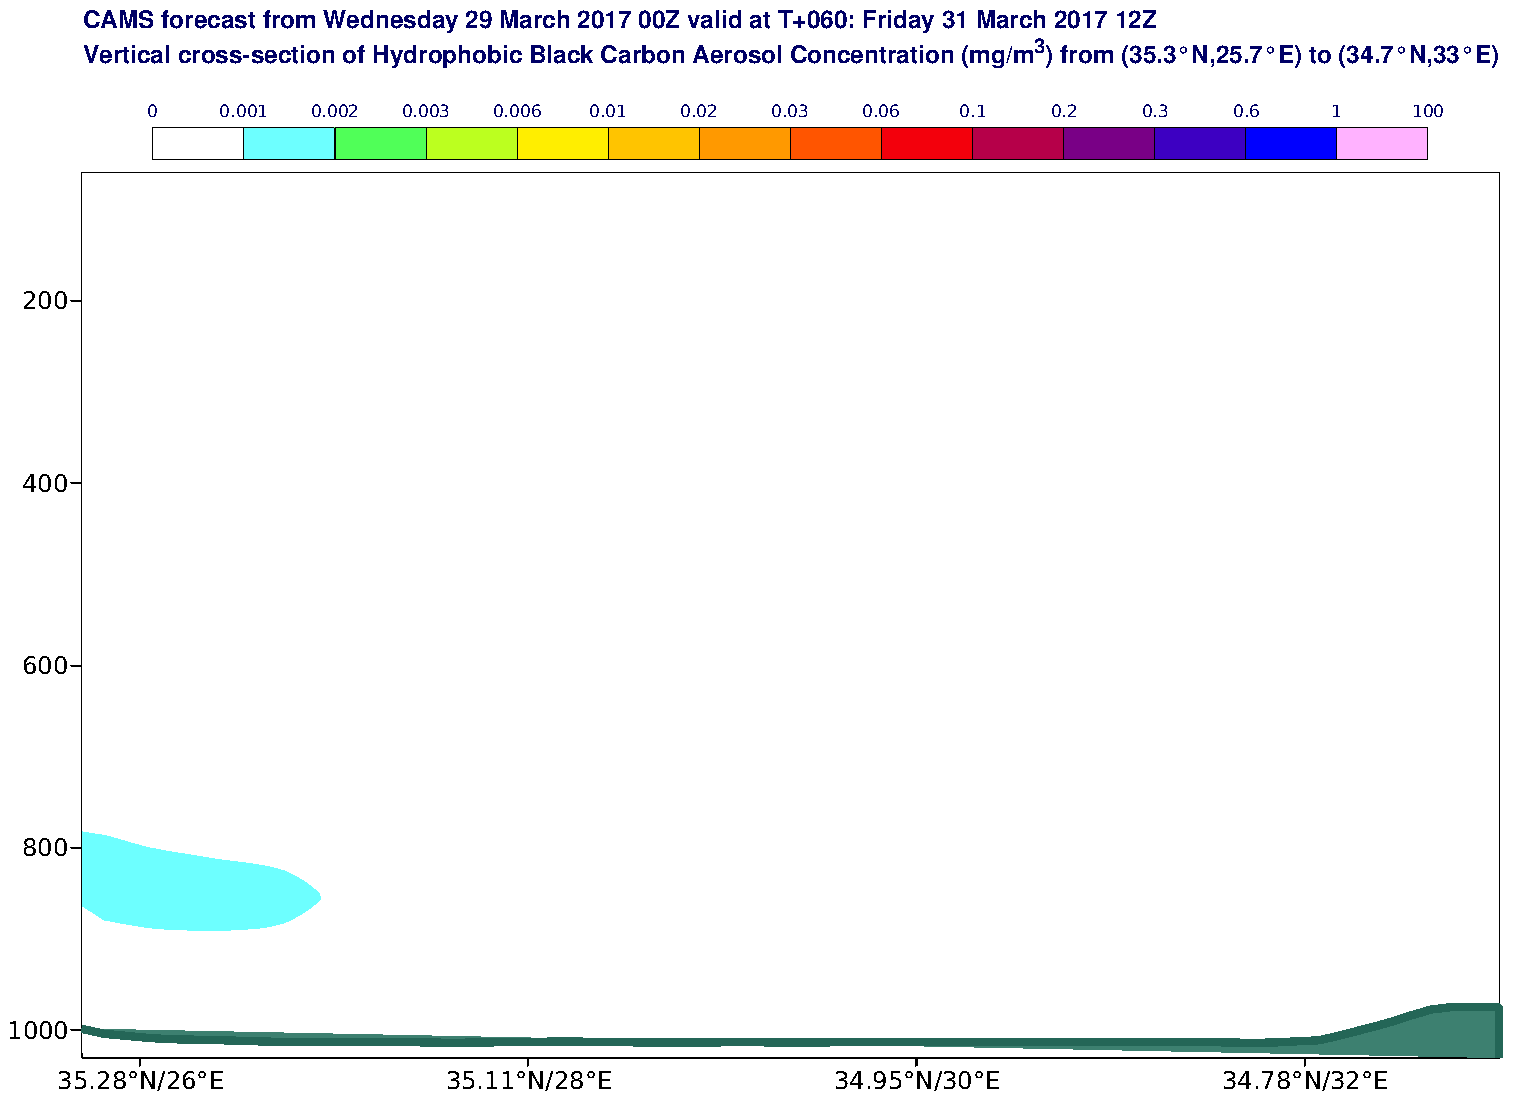 Vertical cross-section of Hydrophobic Black Carbon Aerosol Concentration (mg/m3) valid at T60 - 2017-03-31 12:00